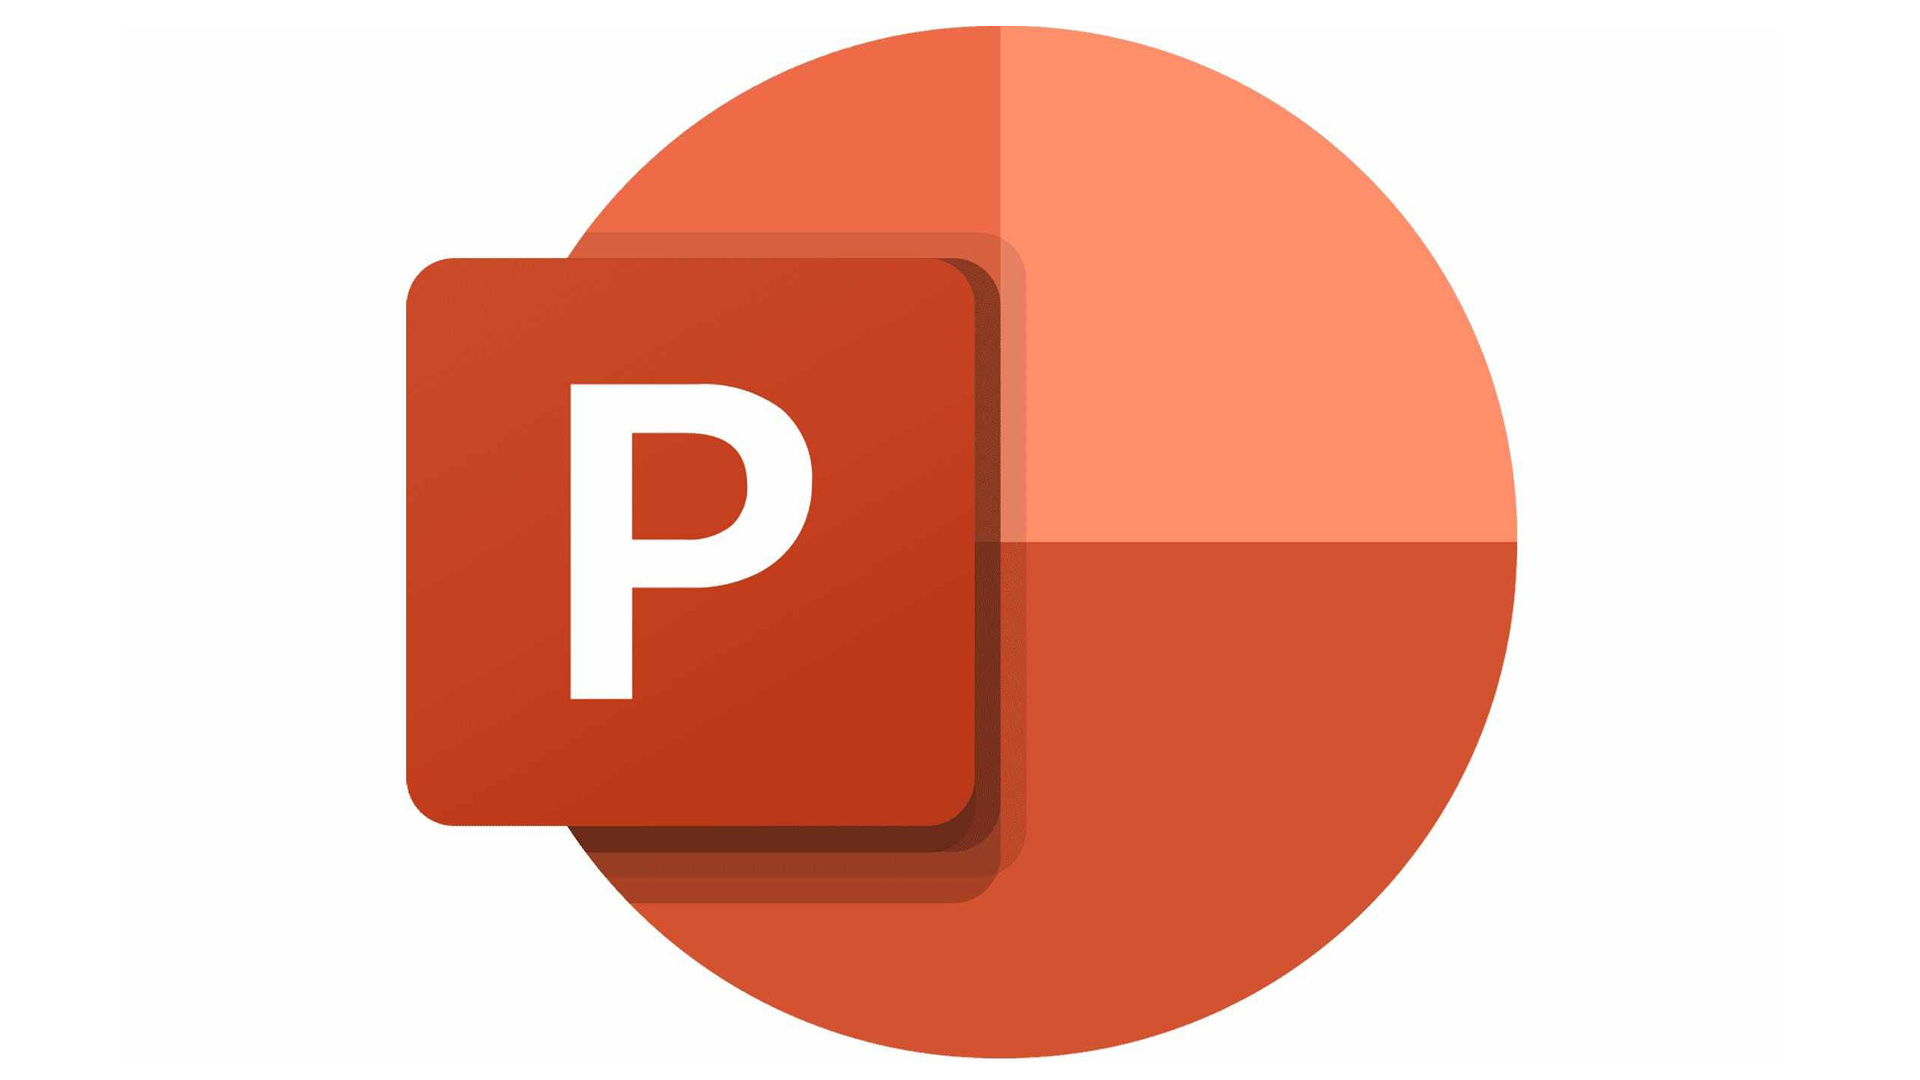 microsoft powerpoint reduce file size